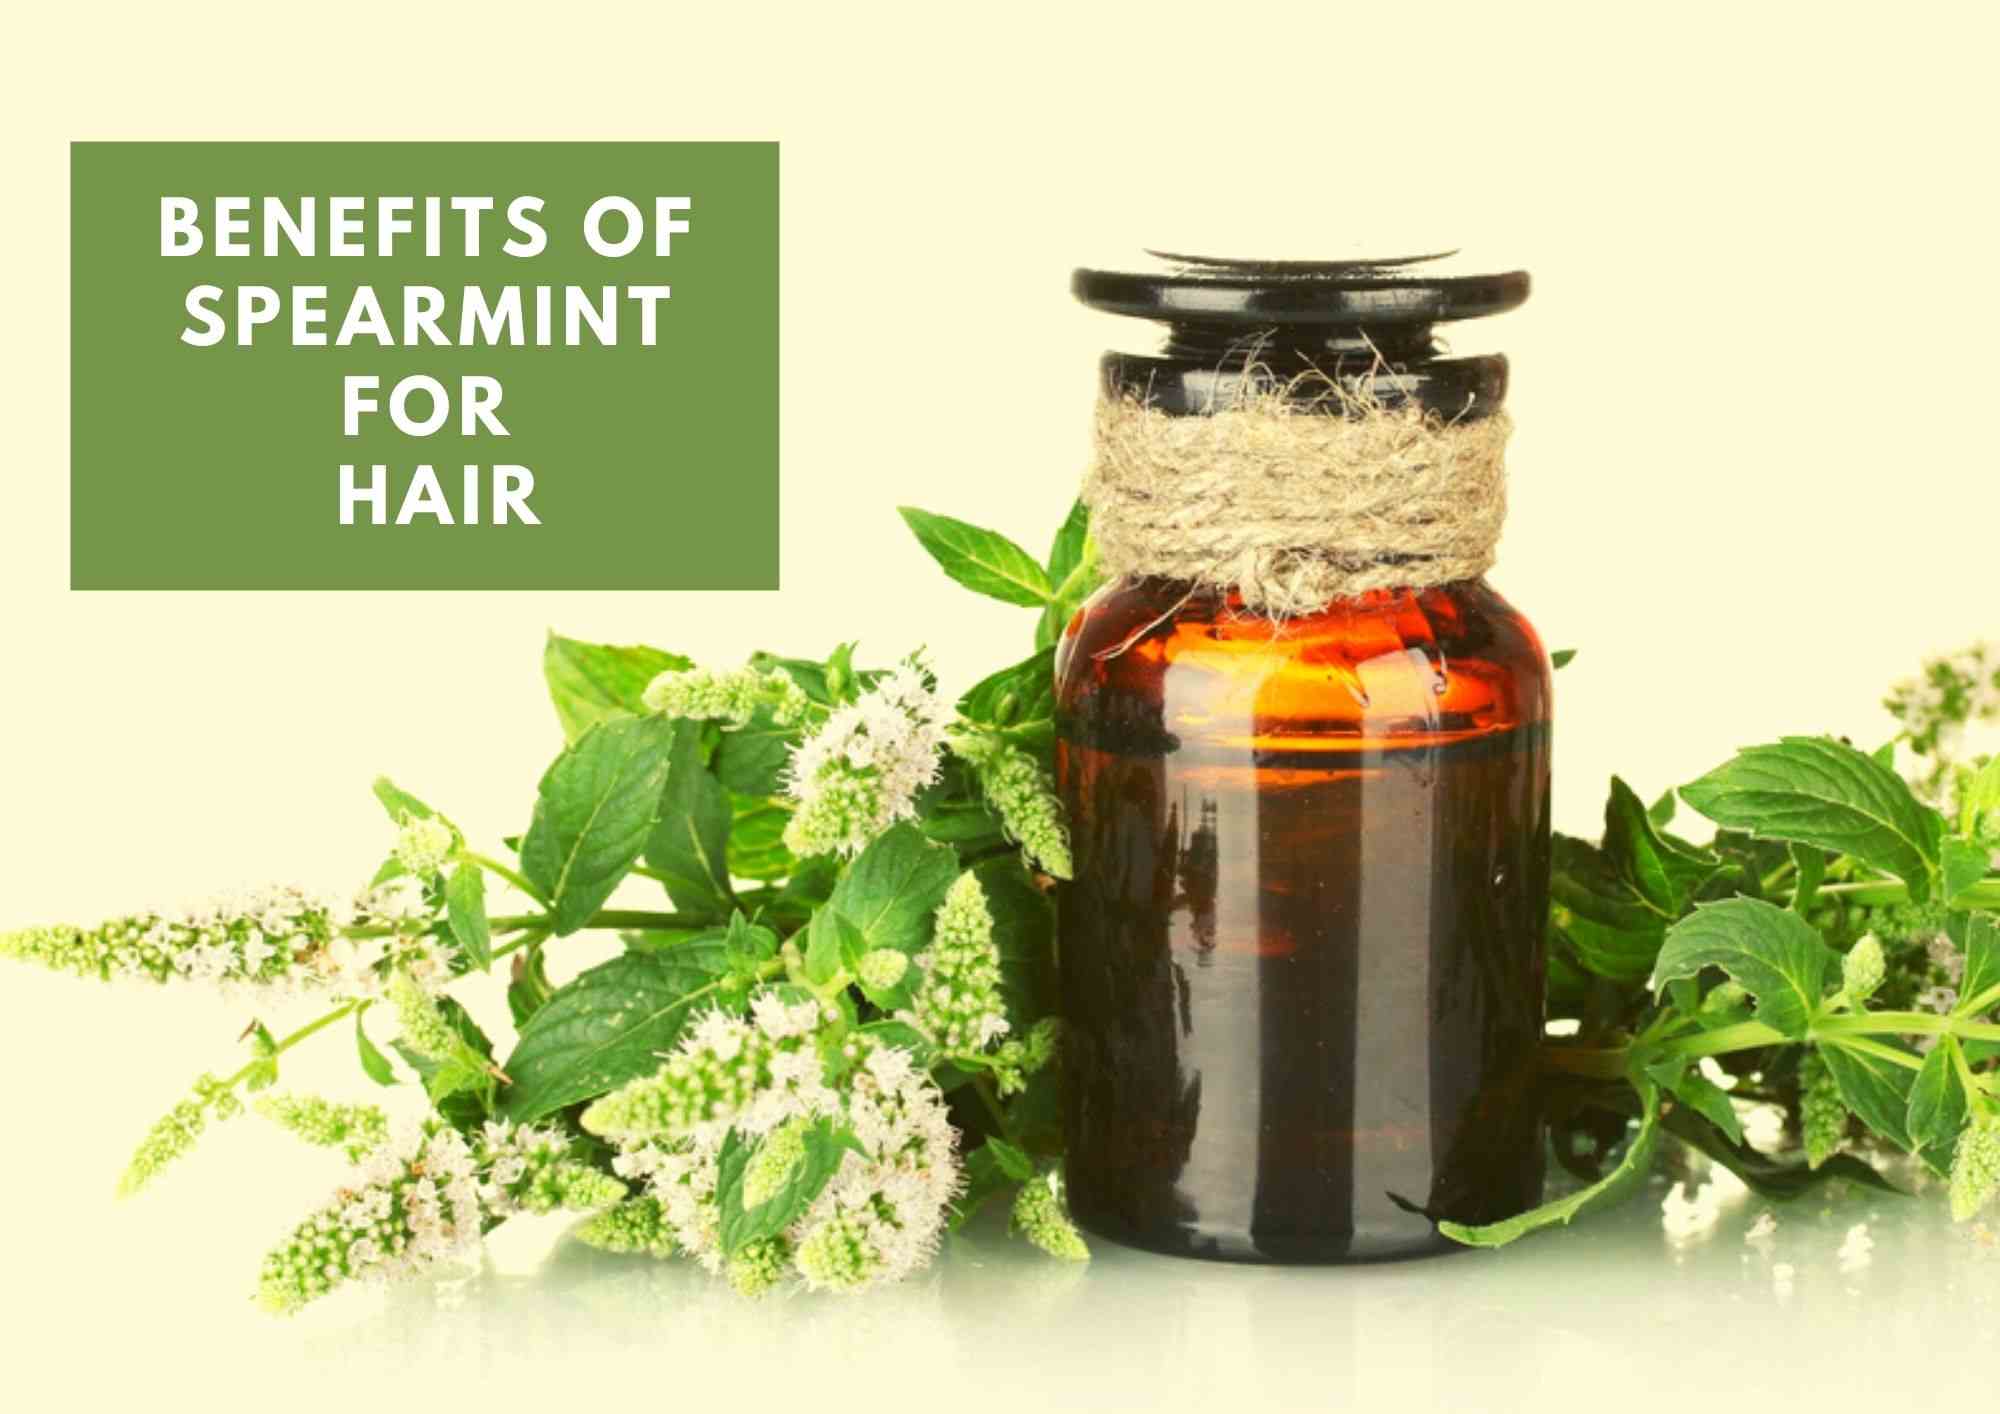 4 Amazing Spearmint Oil Benefits For Hair 2023 | Uses And Applications -  Hair Everyday Review